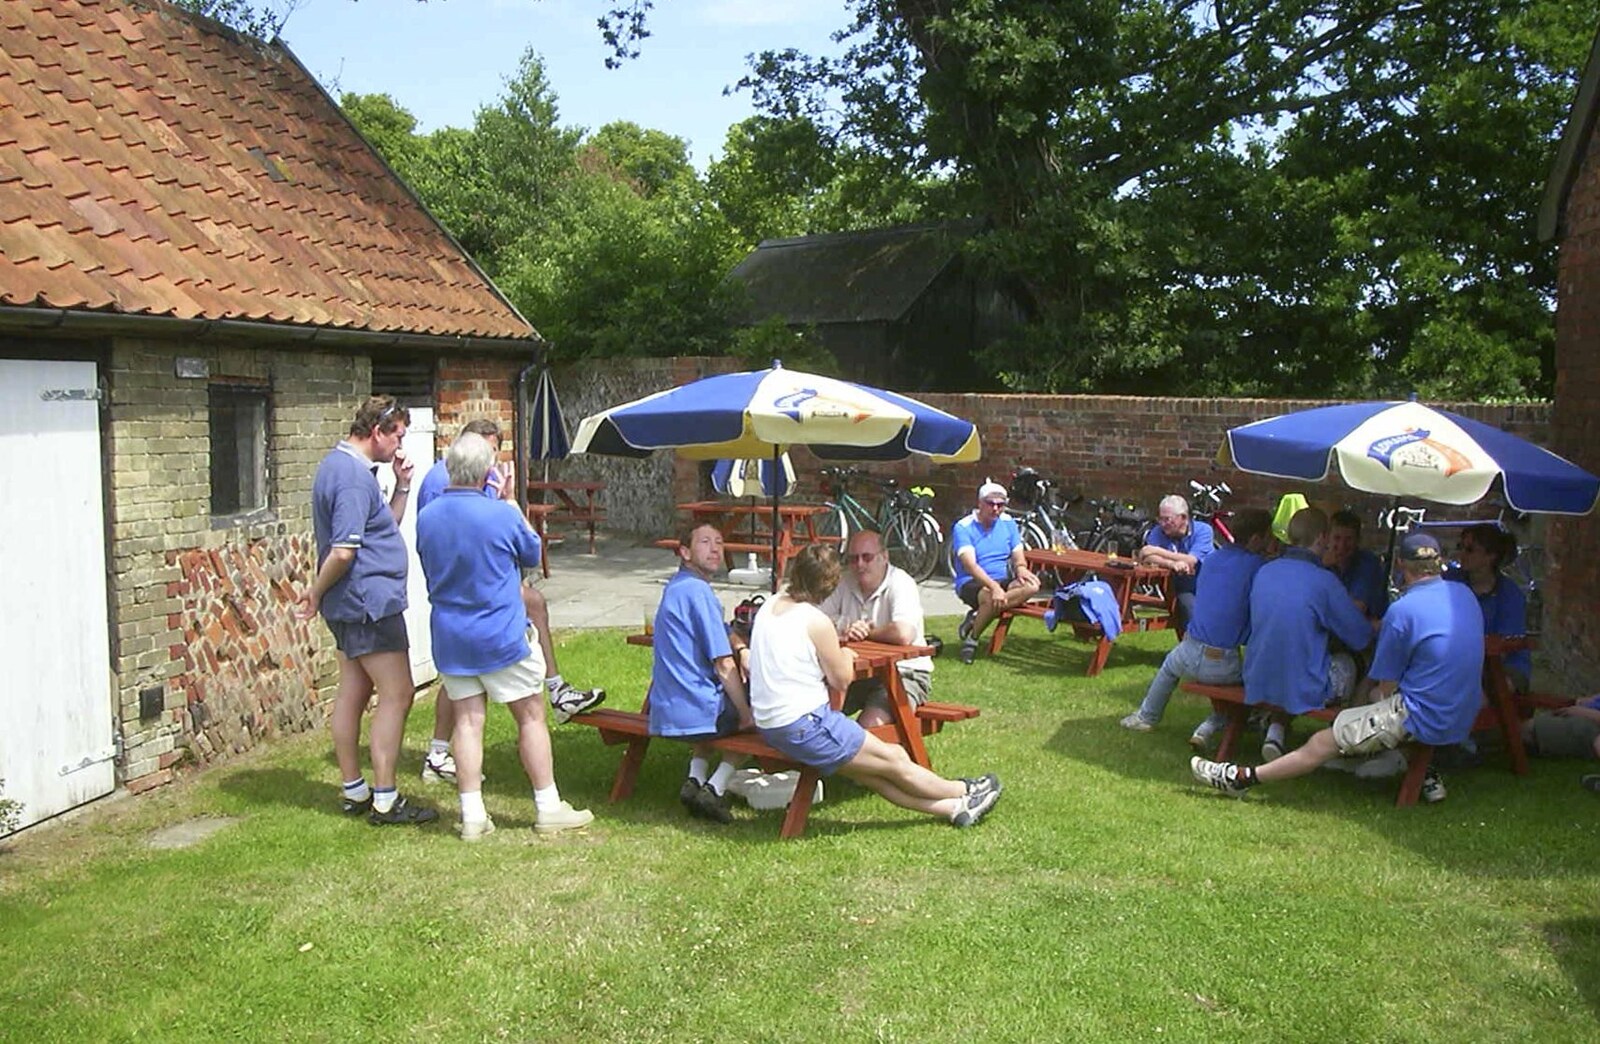 The BSCC Annual Bike Ride, Orford, Suffolk - 12th July 2003: In the beer garden